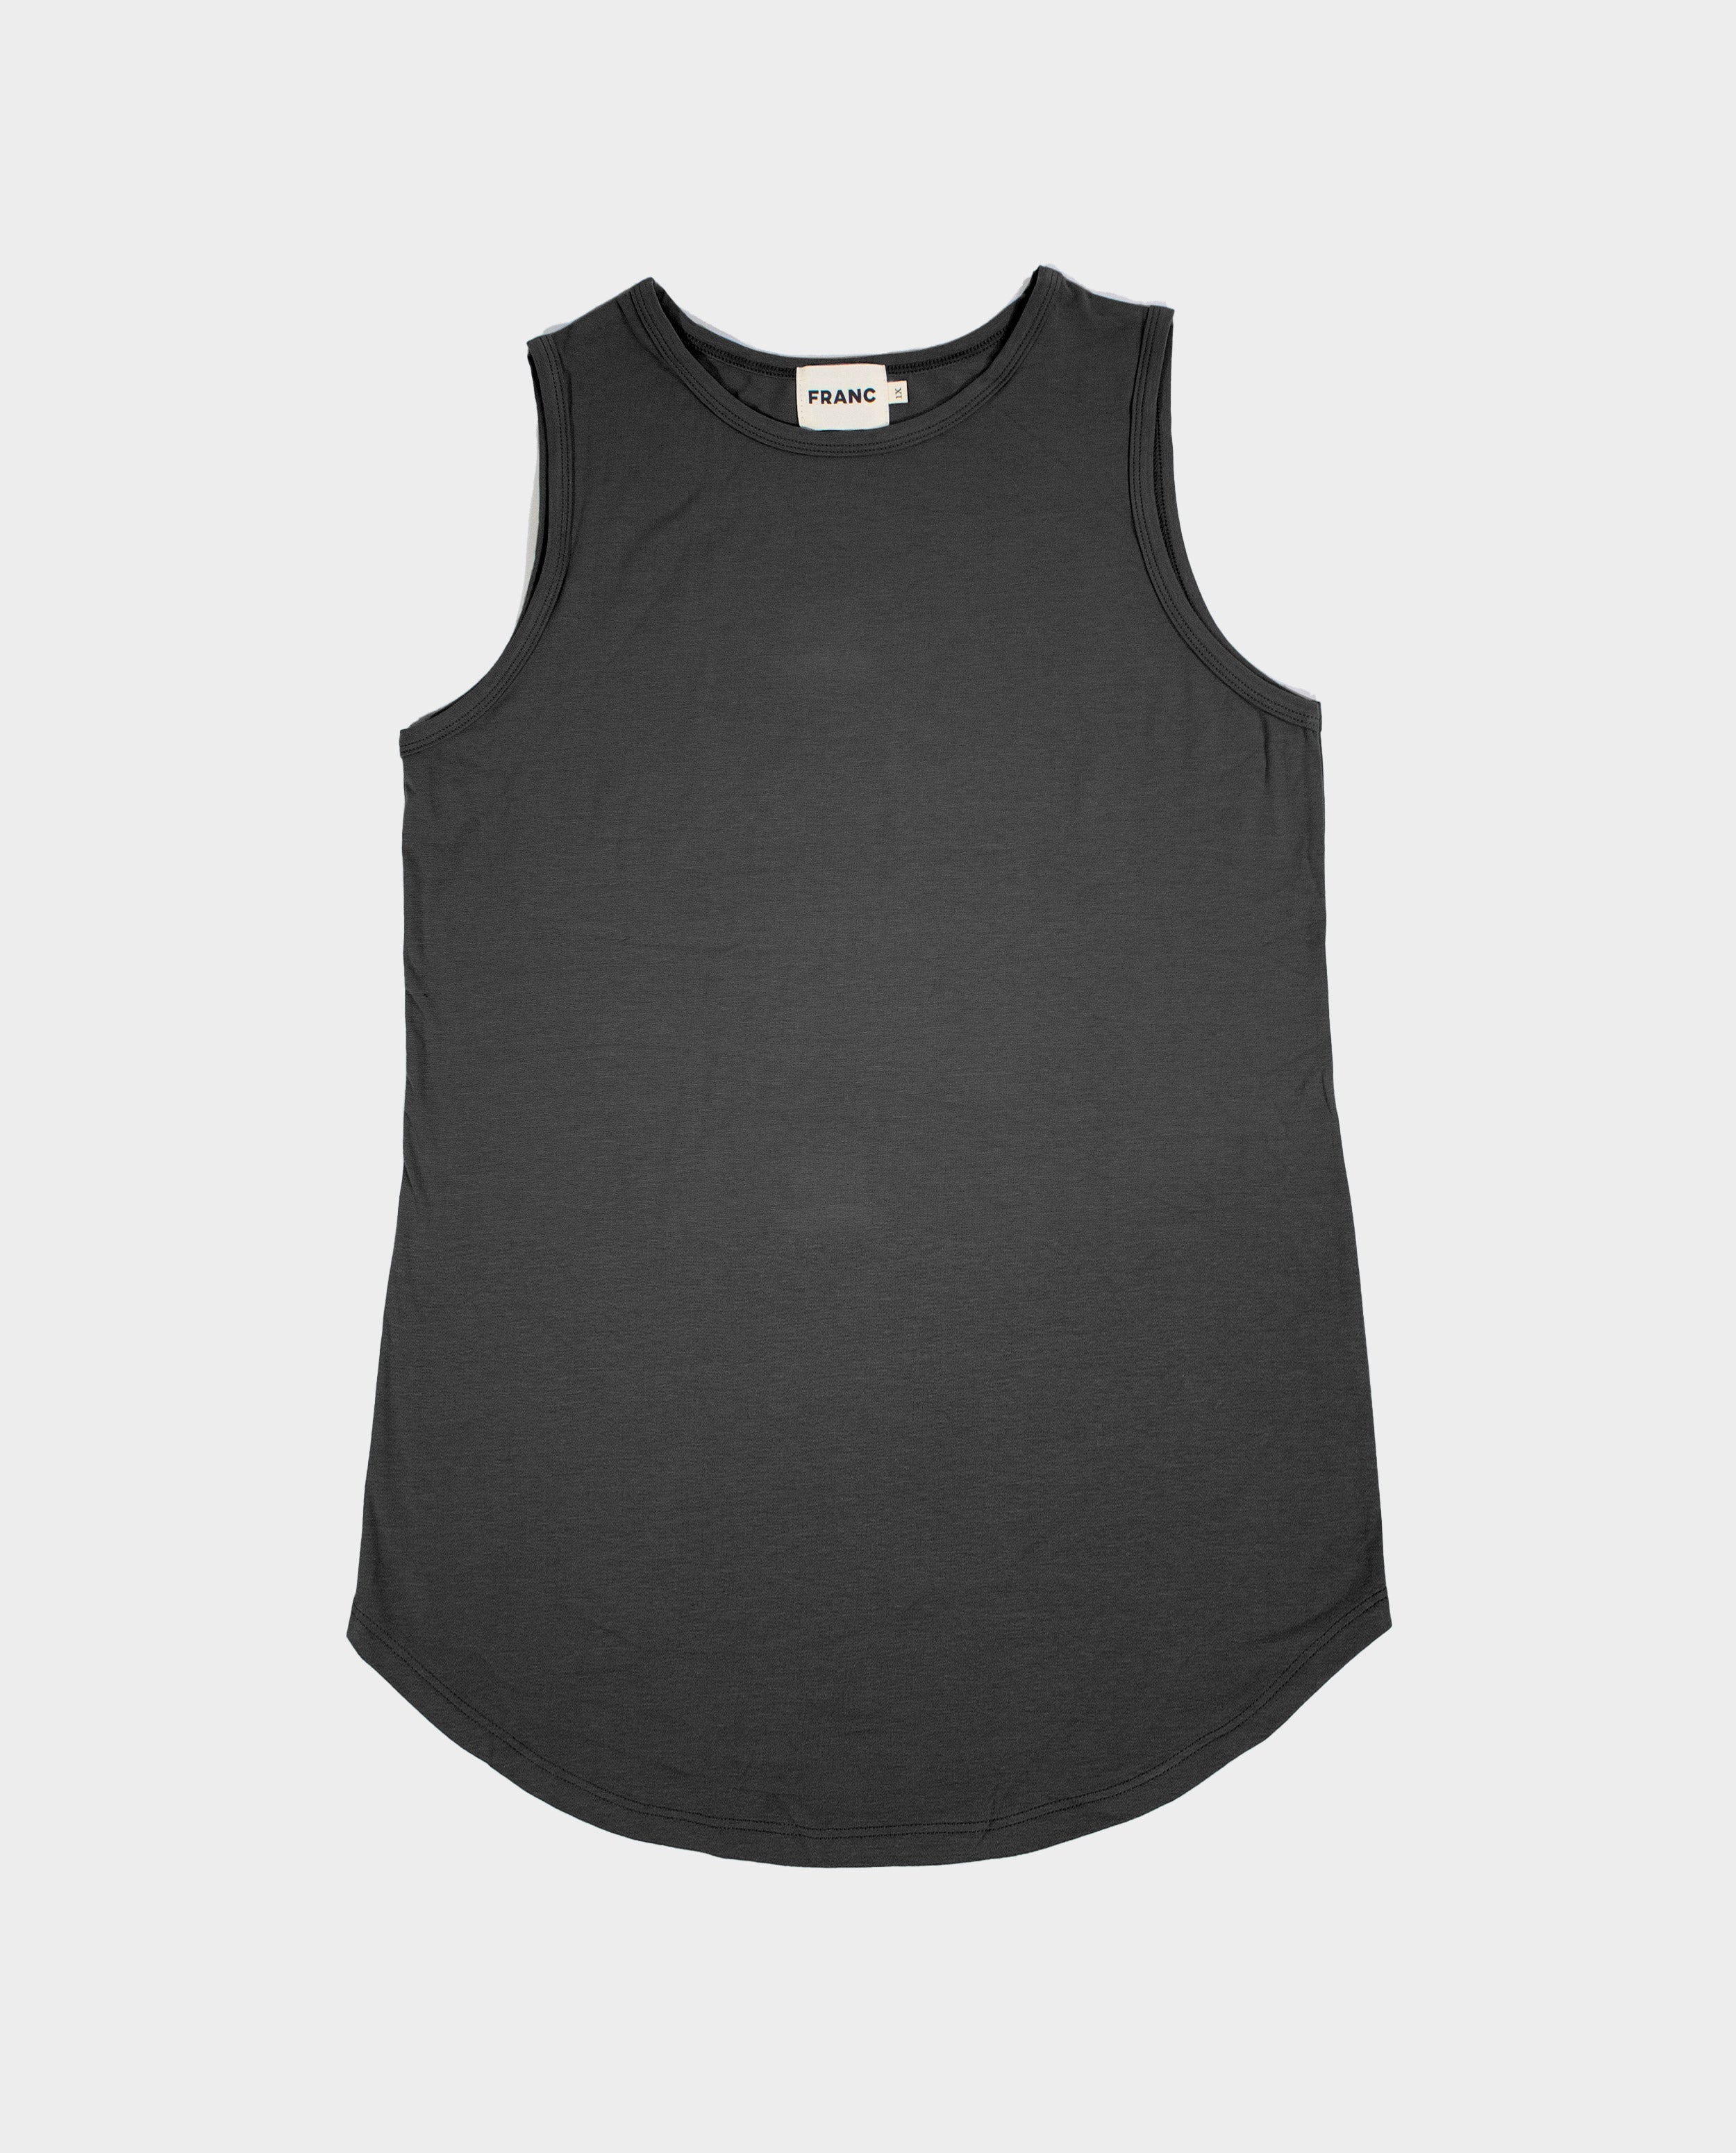 The Highneck Tank Top in Ash | FRANC Sustainable Clothing